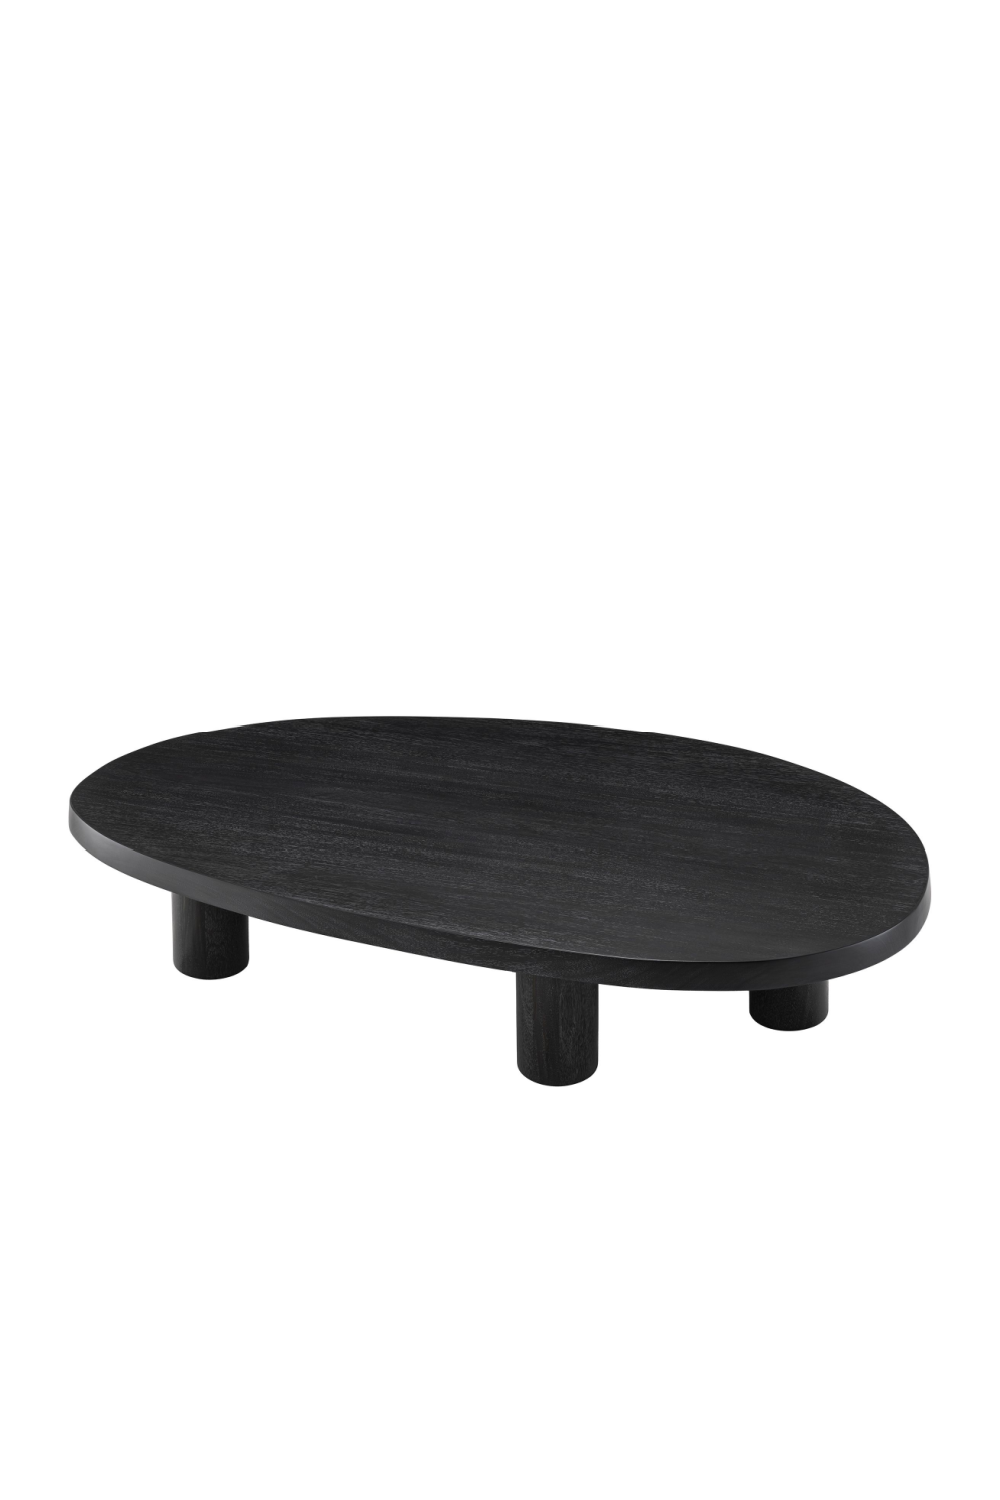 Charcoal Gray Mahogany Wood Coffee Table, Eichholtz Prelude